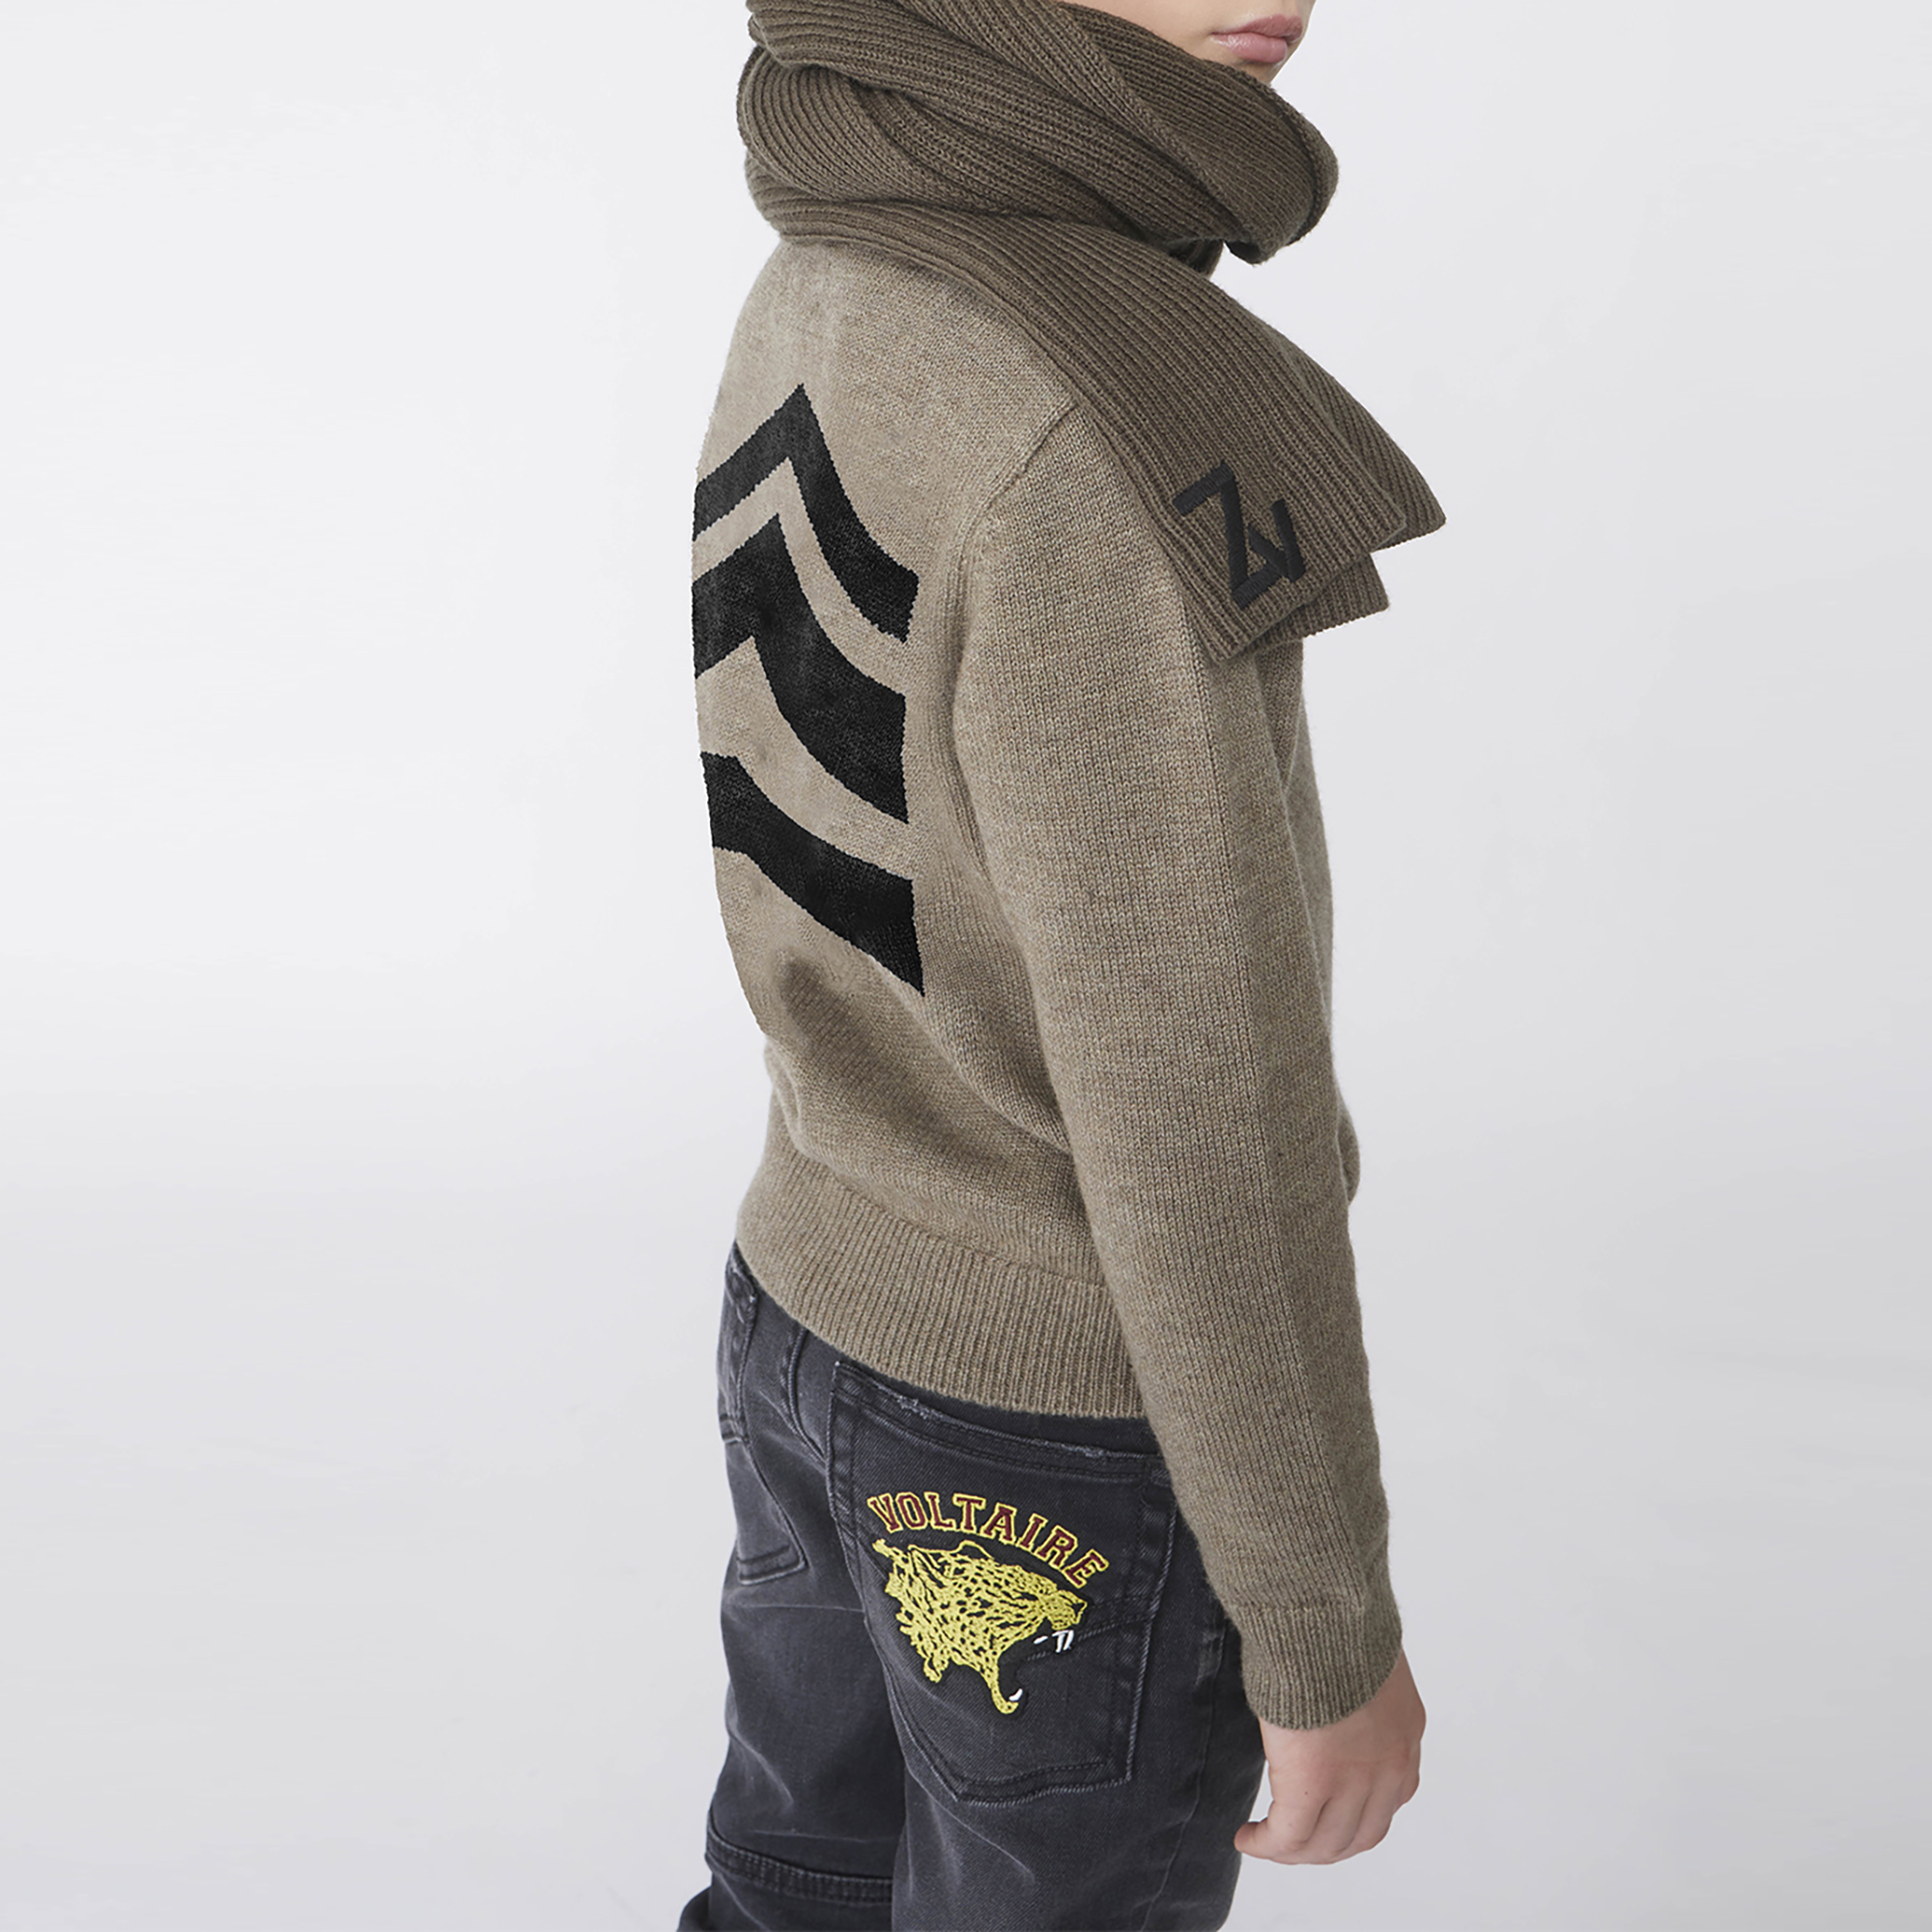 Wool blend tricot sweater ZADIG & VOLTAIRE for BOY